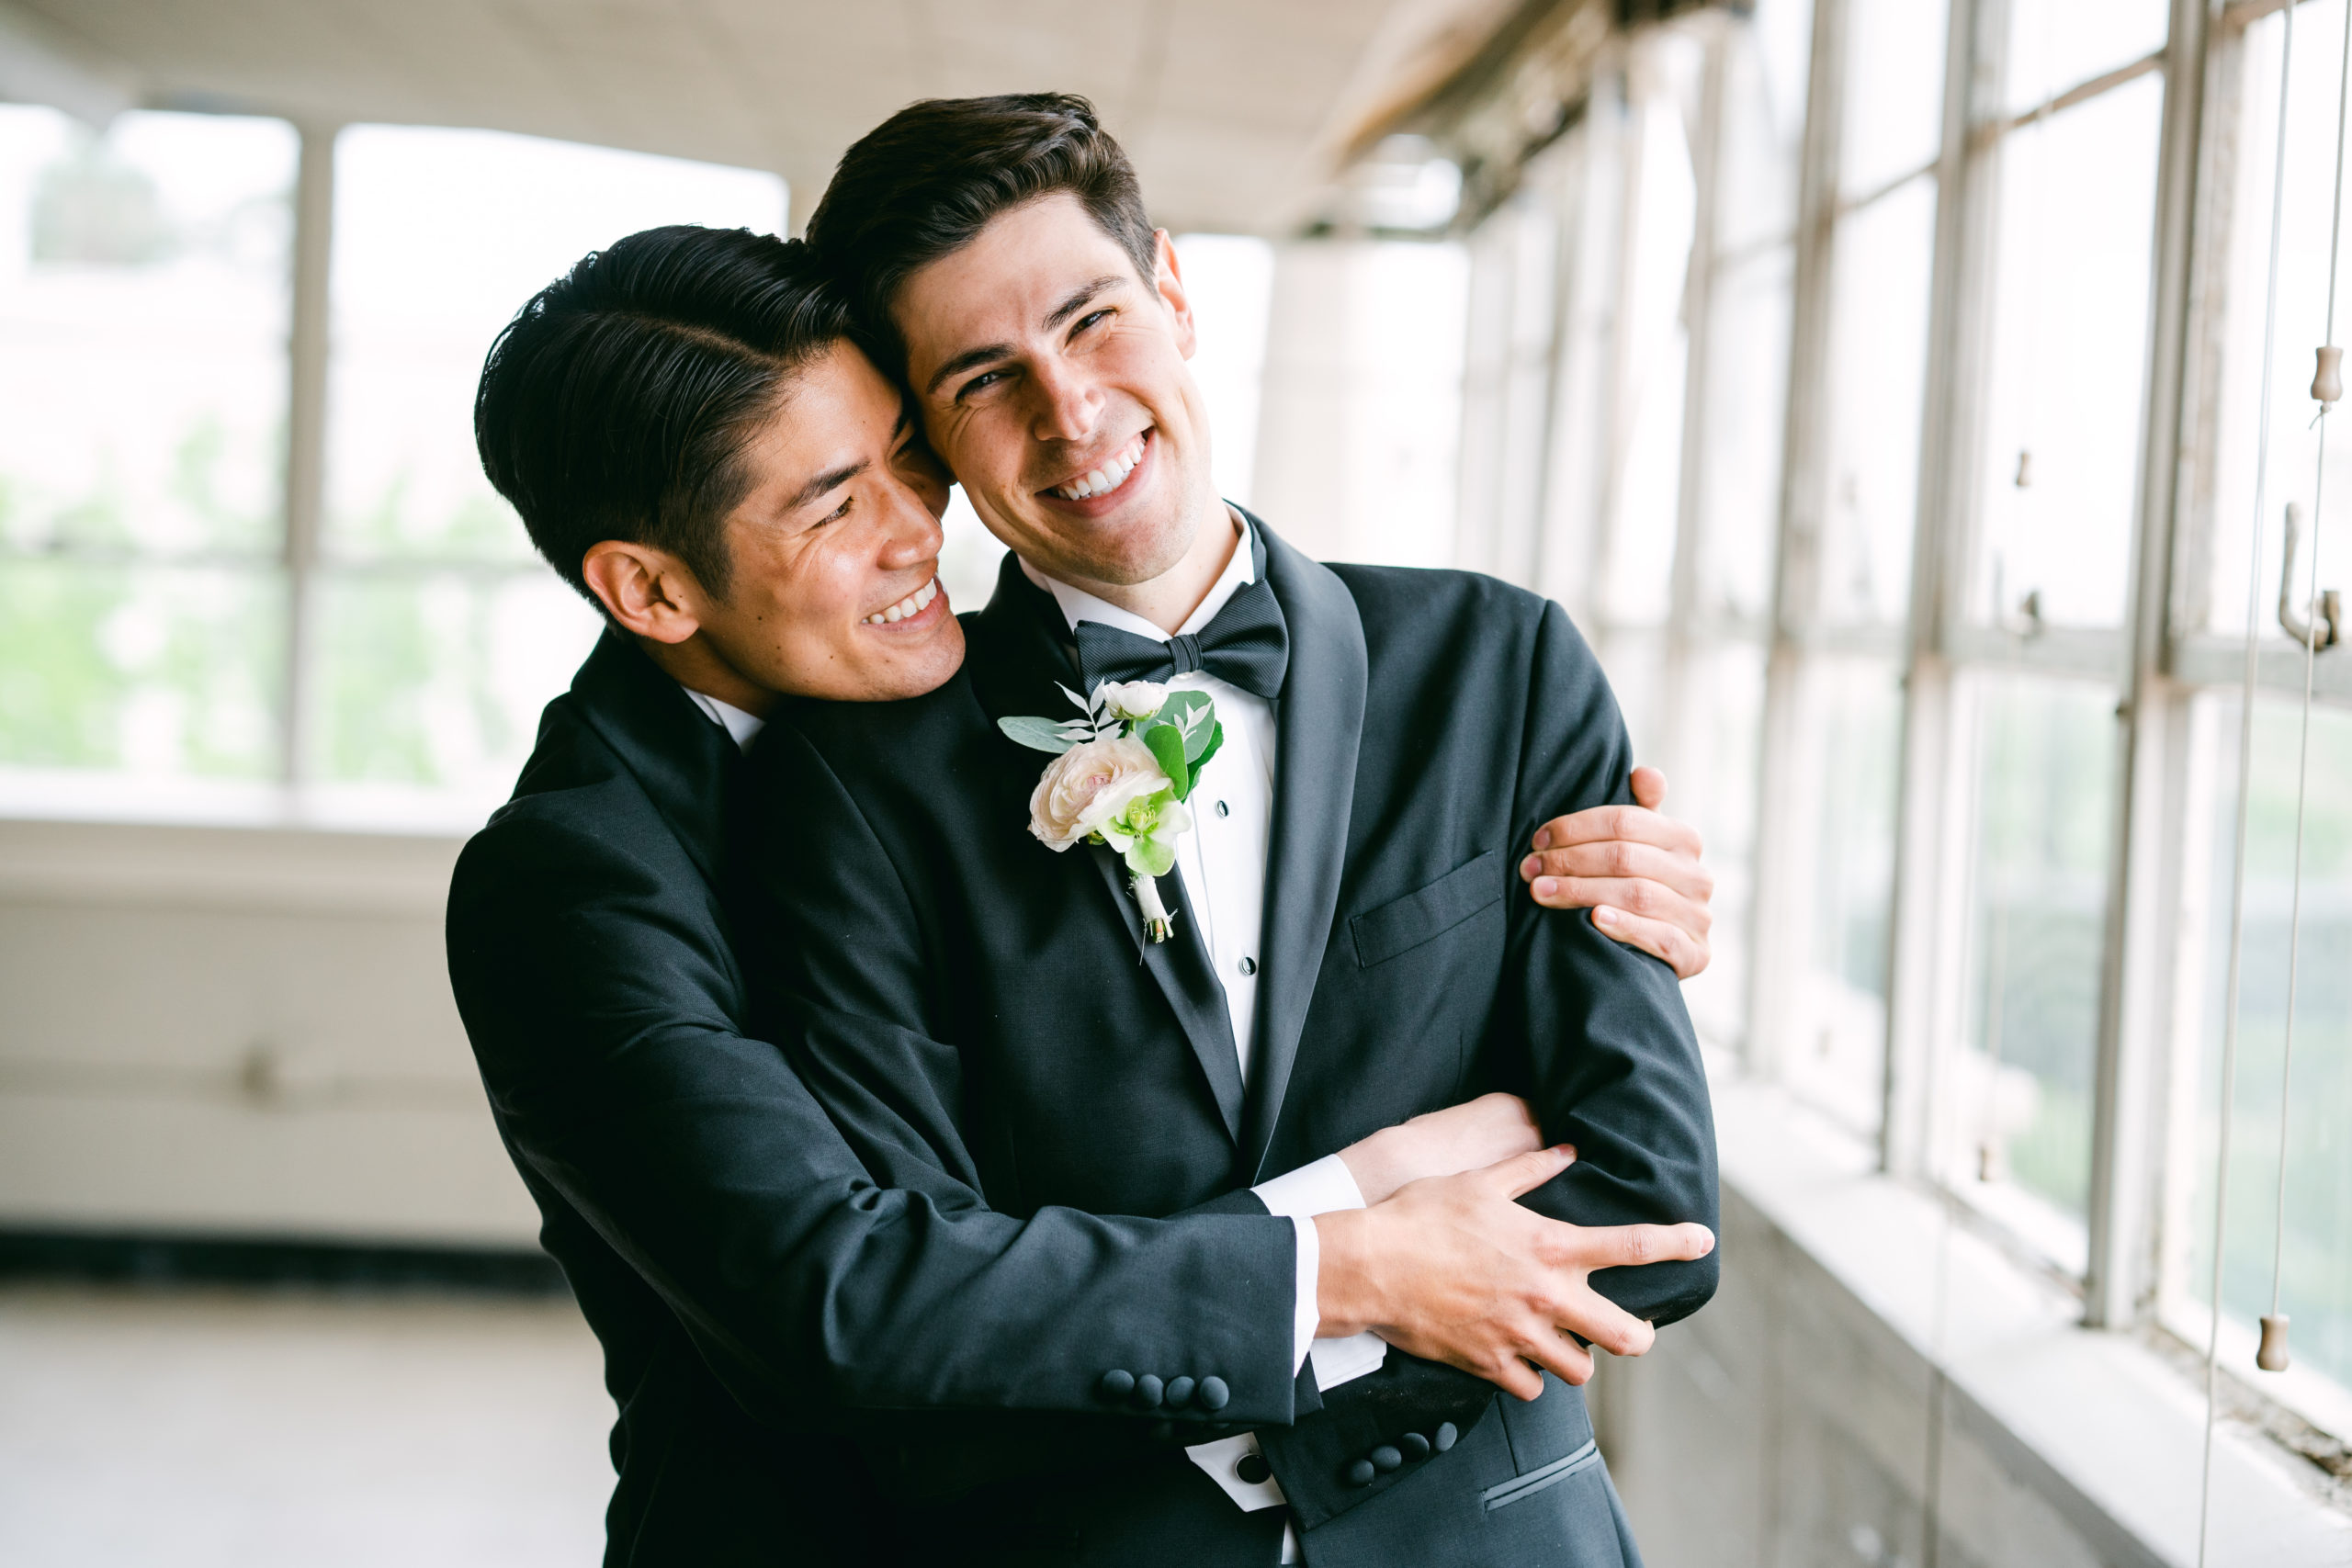 A Ebell Los Angeles wedding photo. Two grooms, Ian and Kenny, pose together. One hugging the other while he smiles at the camera.